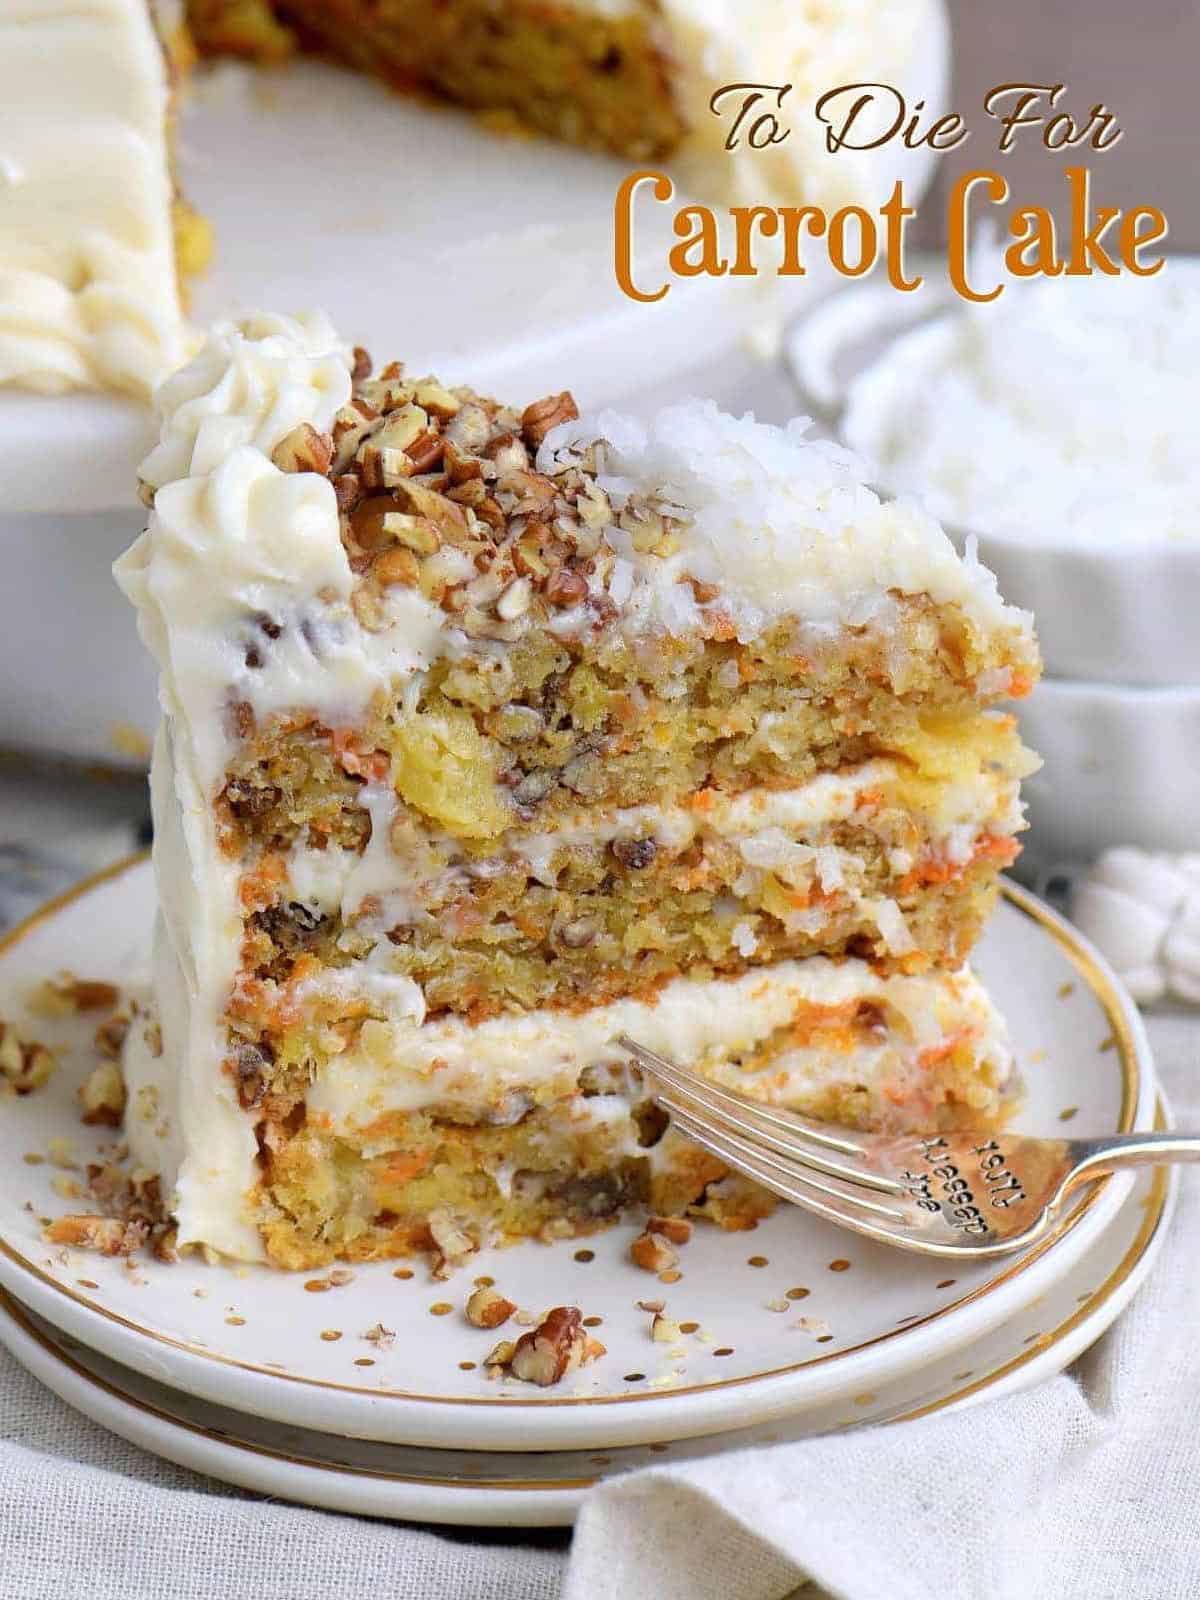 Sure, here are 11 unique photo captions for the Carrot Apple Pineapple Cake recipe: